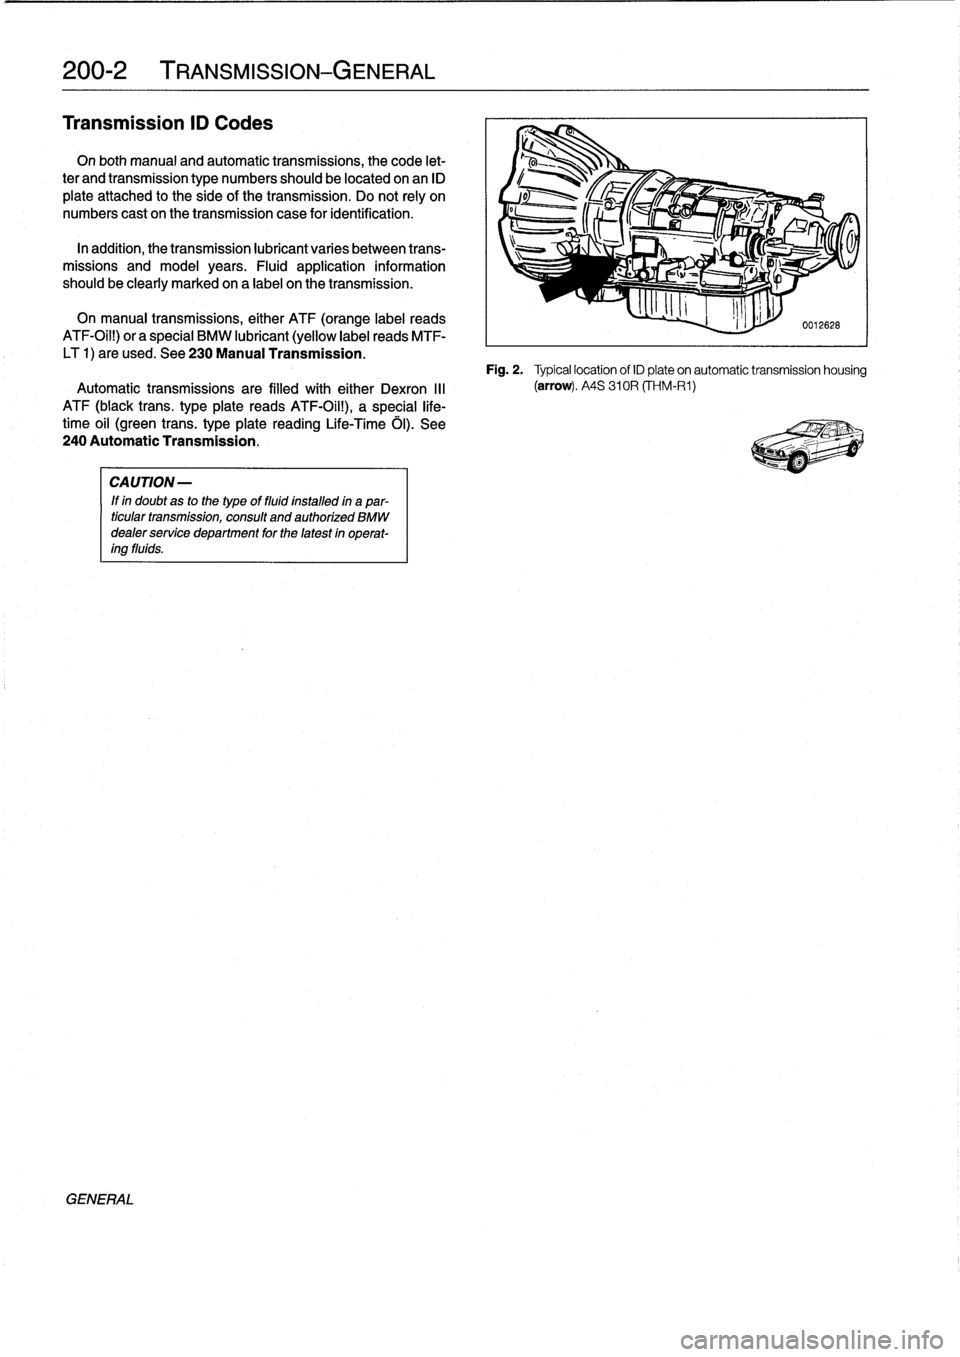 BMW 318i 1997 E36 User Guide 
200-2
TRANSMISSION-GENERAL

Transmission
ID
Codes

On
both
manual
and
automatic
transmissions,
the
code
let-

ter
and
transmission
type
numbers
should
be
located
onan
ID

plate
attached
to
the
síde
